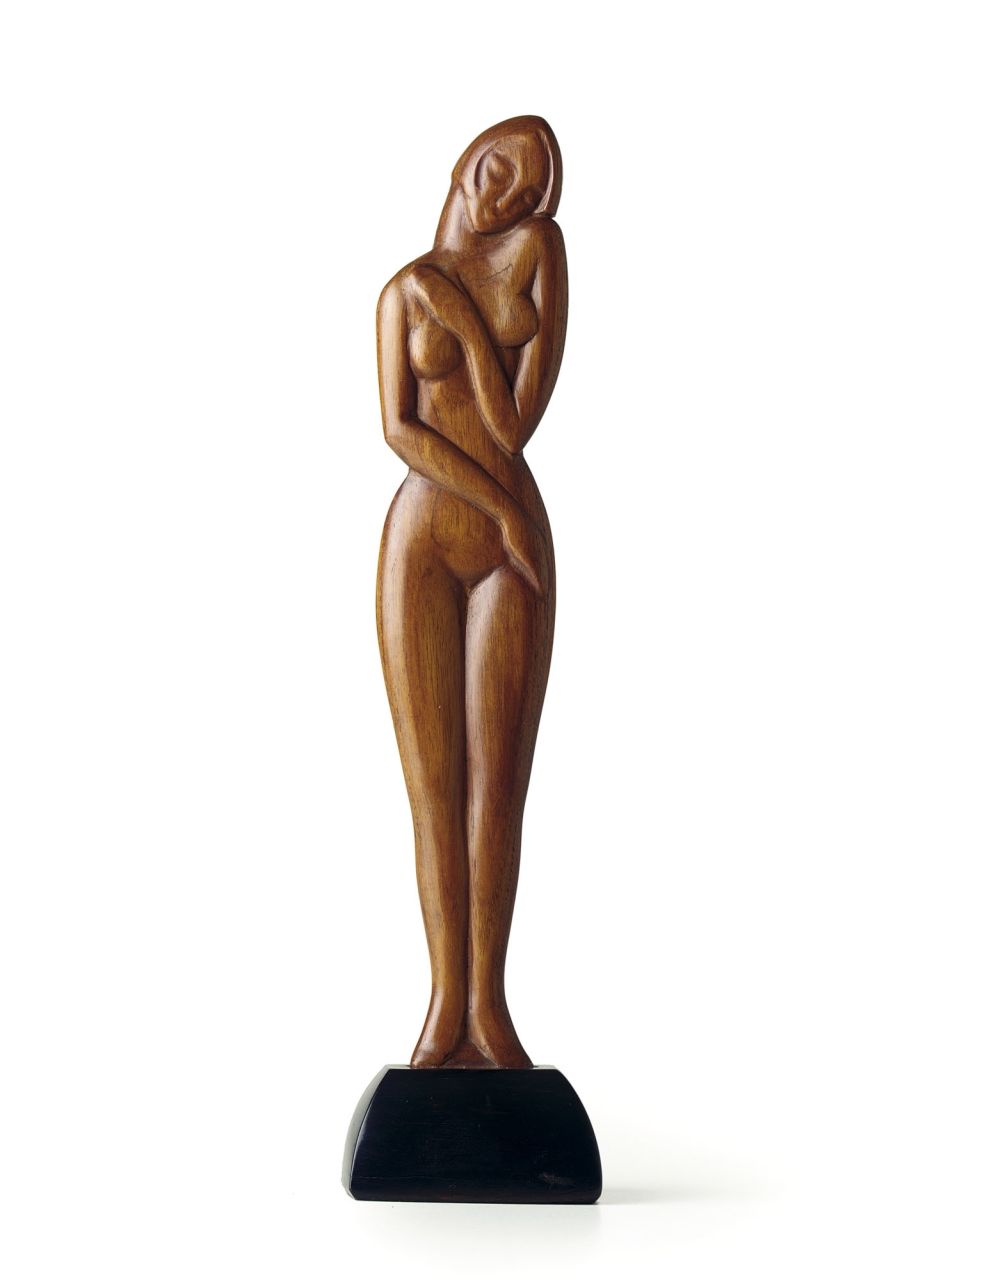 Jordens B.  | Barend Jordens, Female nude, fruitwood 26.5 x 10.0 cm, signed signed with monogram on the base and dated 1925